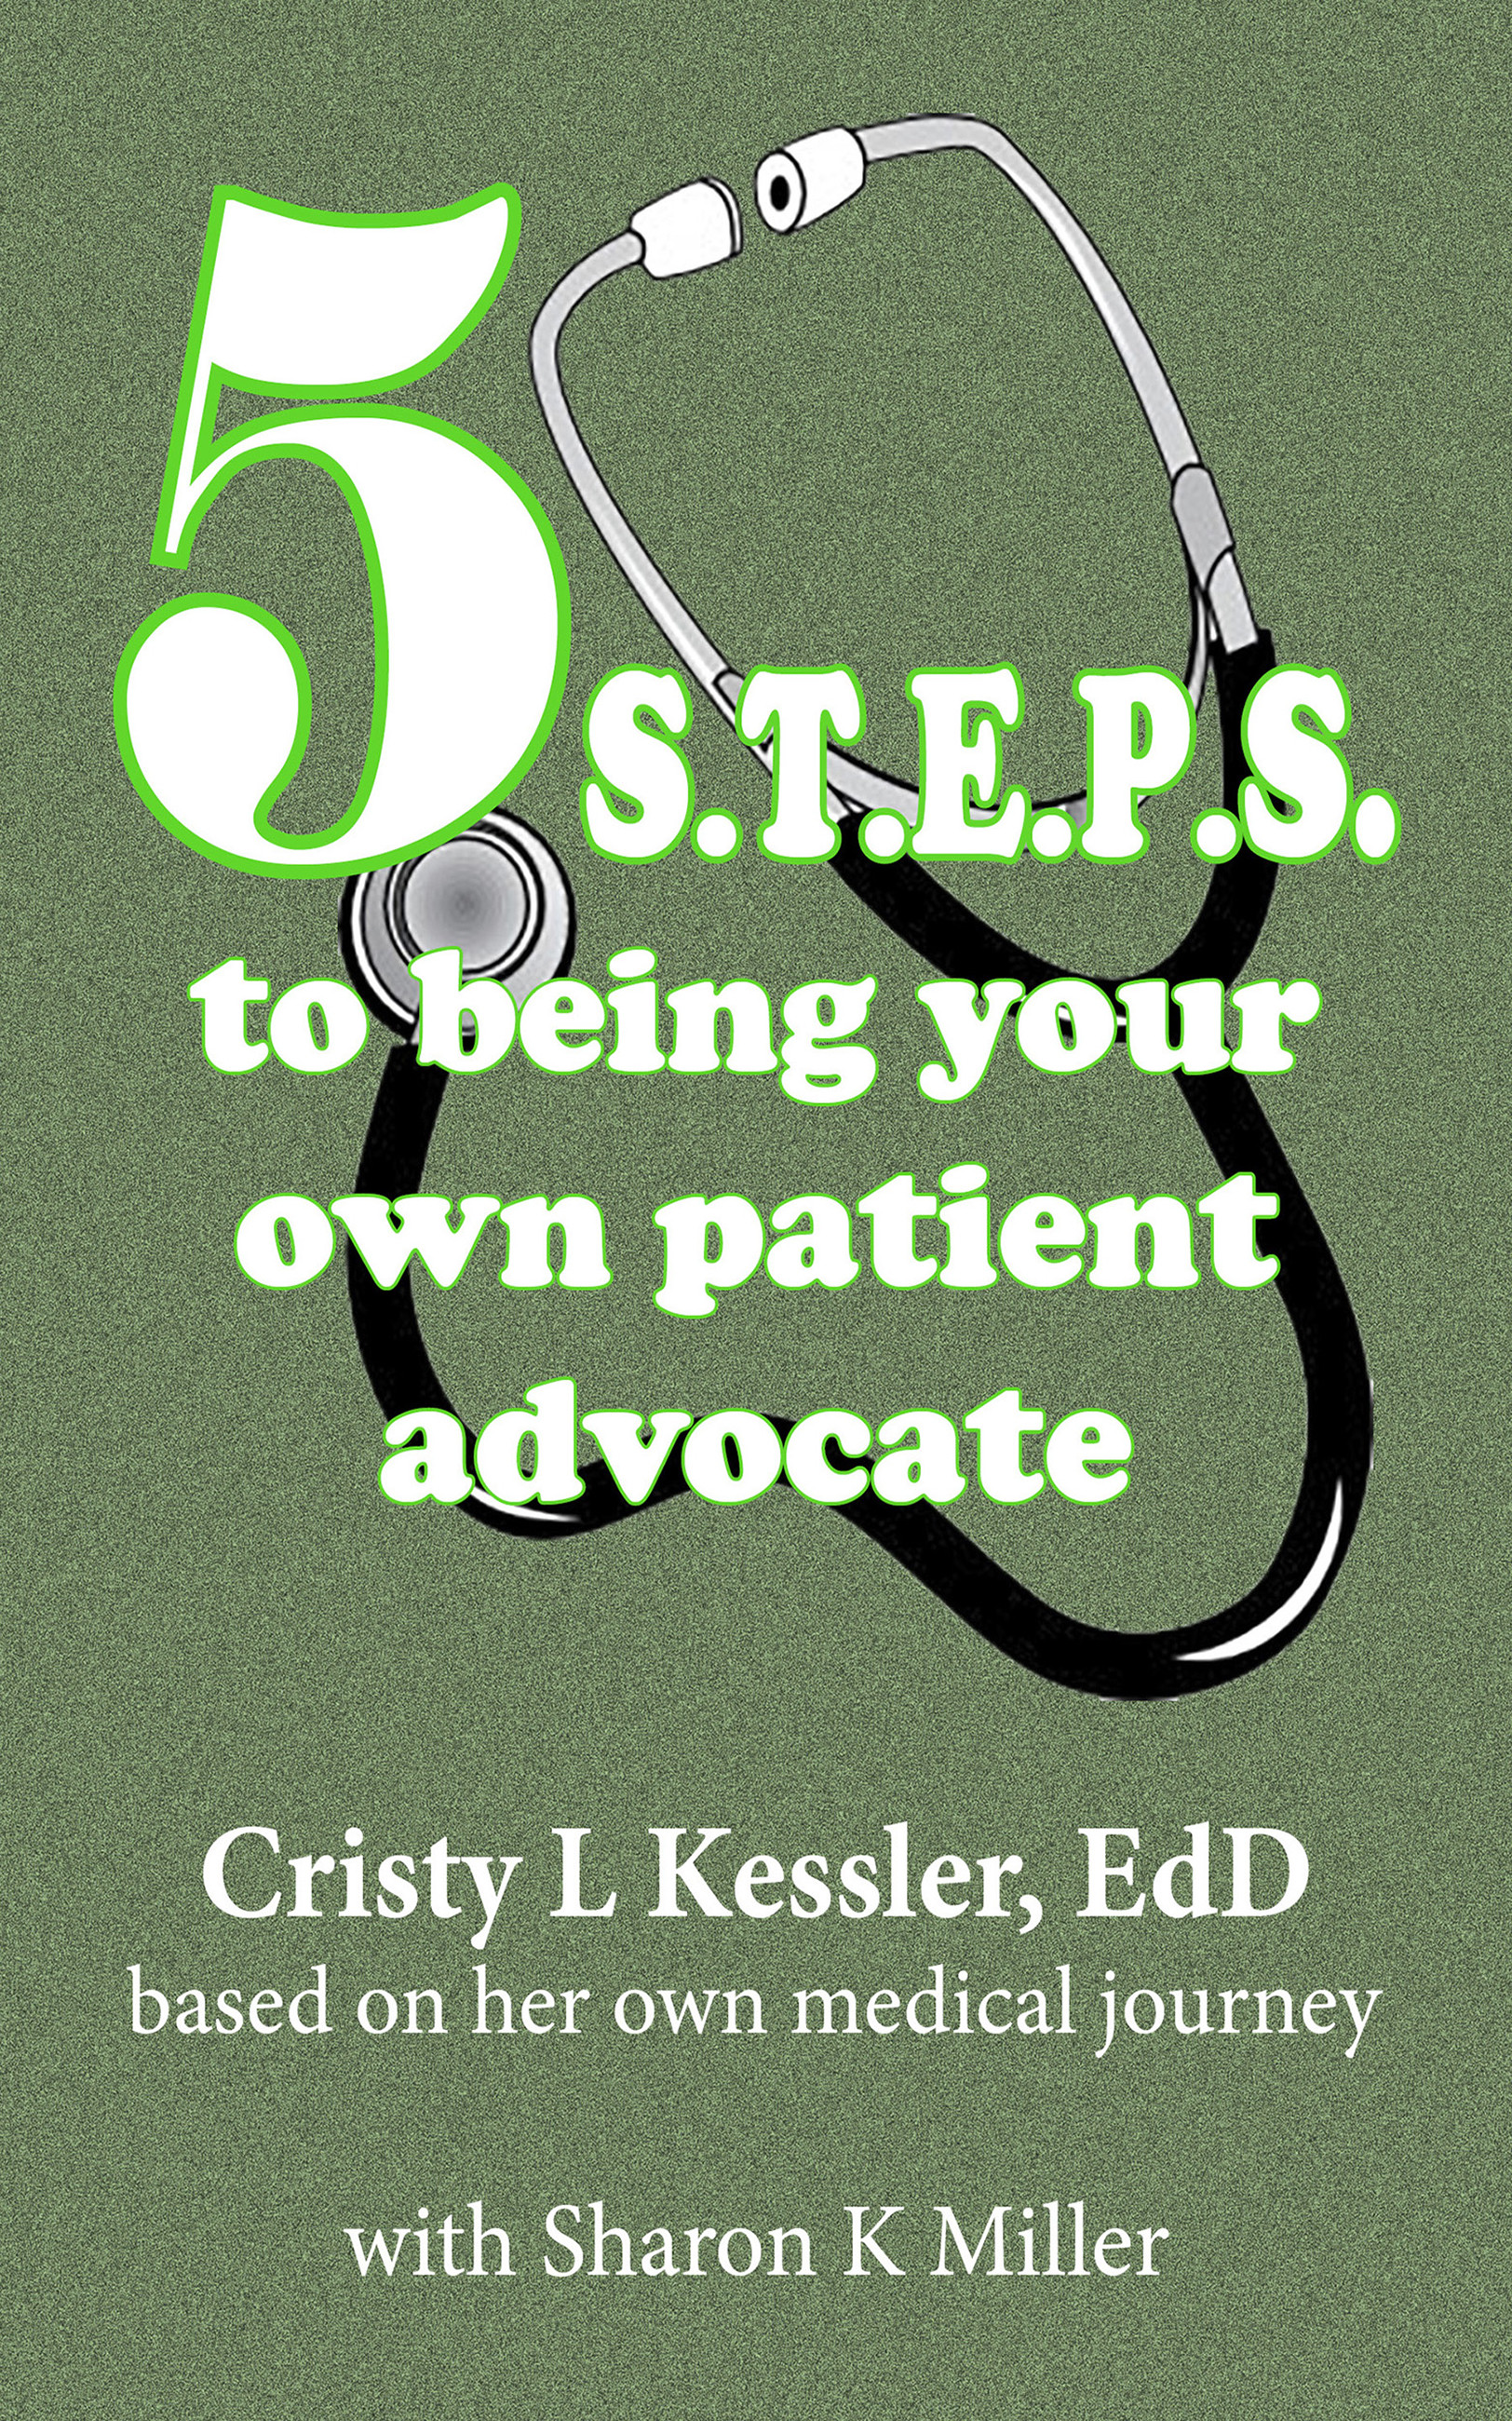 5 S.T.E.P.S. to Being Your Own Patient Advocate